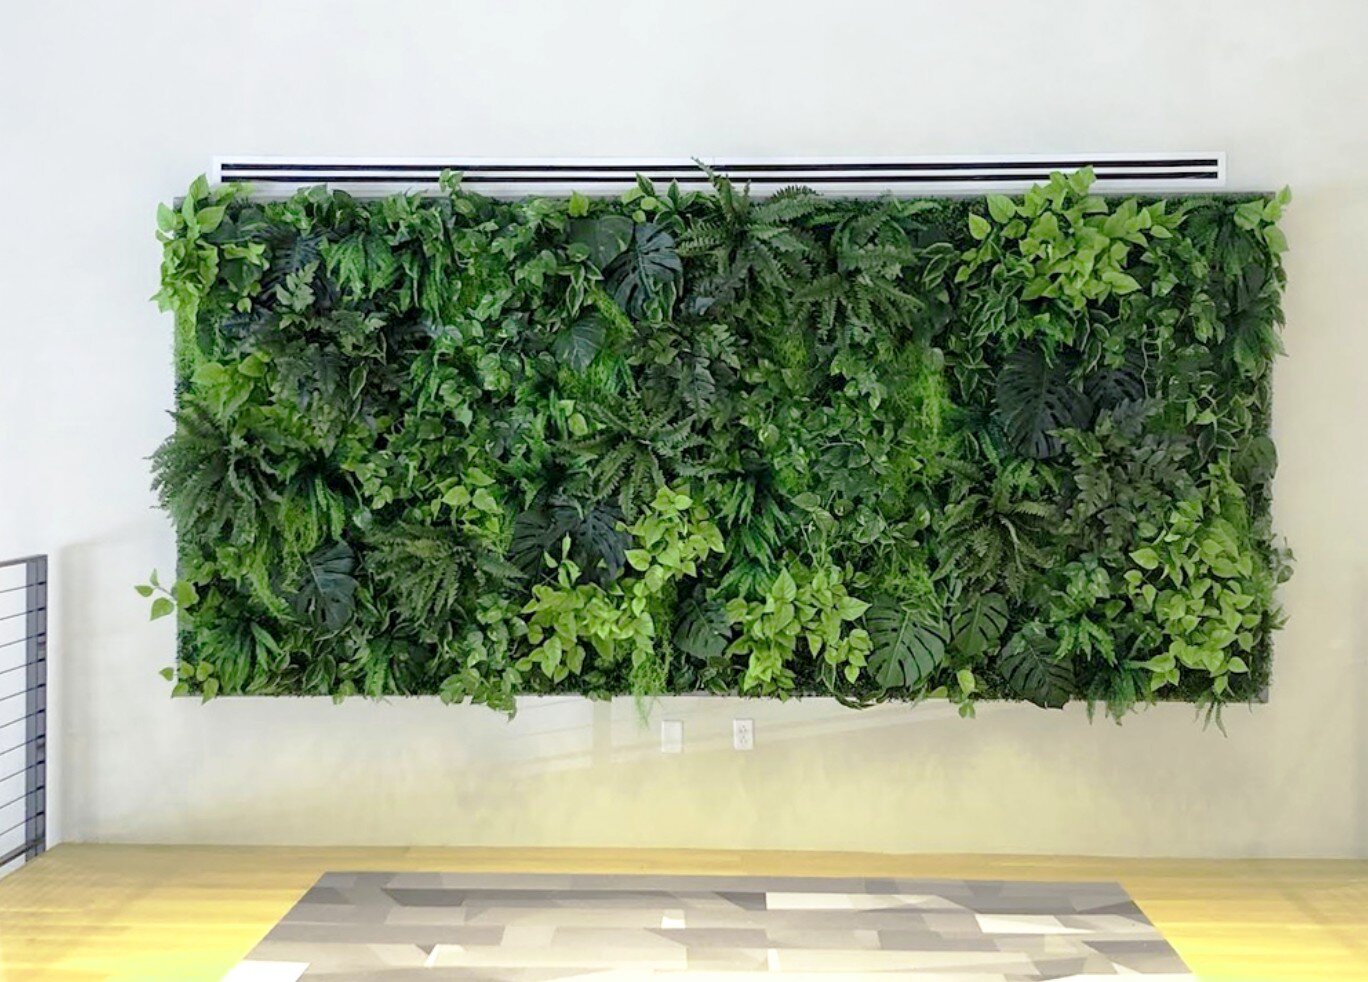 Slow down and take in a moment of calm and serenity. 🌿

#plantwall #replicawall #interiorplantscape #natureart #plantdesign #plantsmakepeoplehappy #greenwall #fauxwall #plantsmakepeoplehappy #plantscape #interiorplants #interiordecor #interiordesign